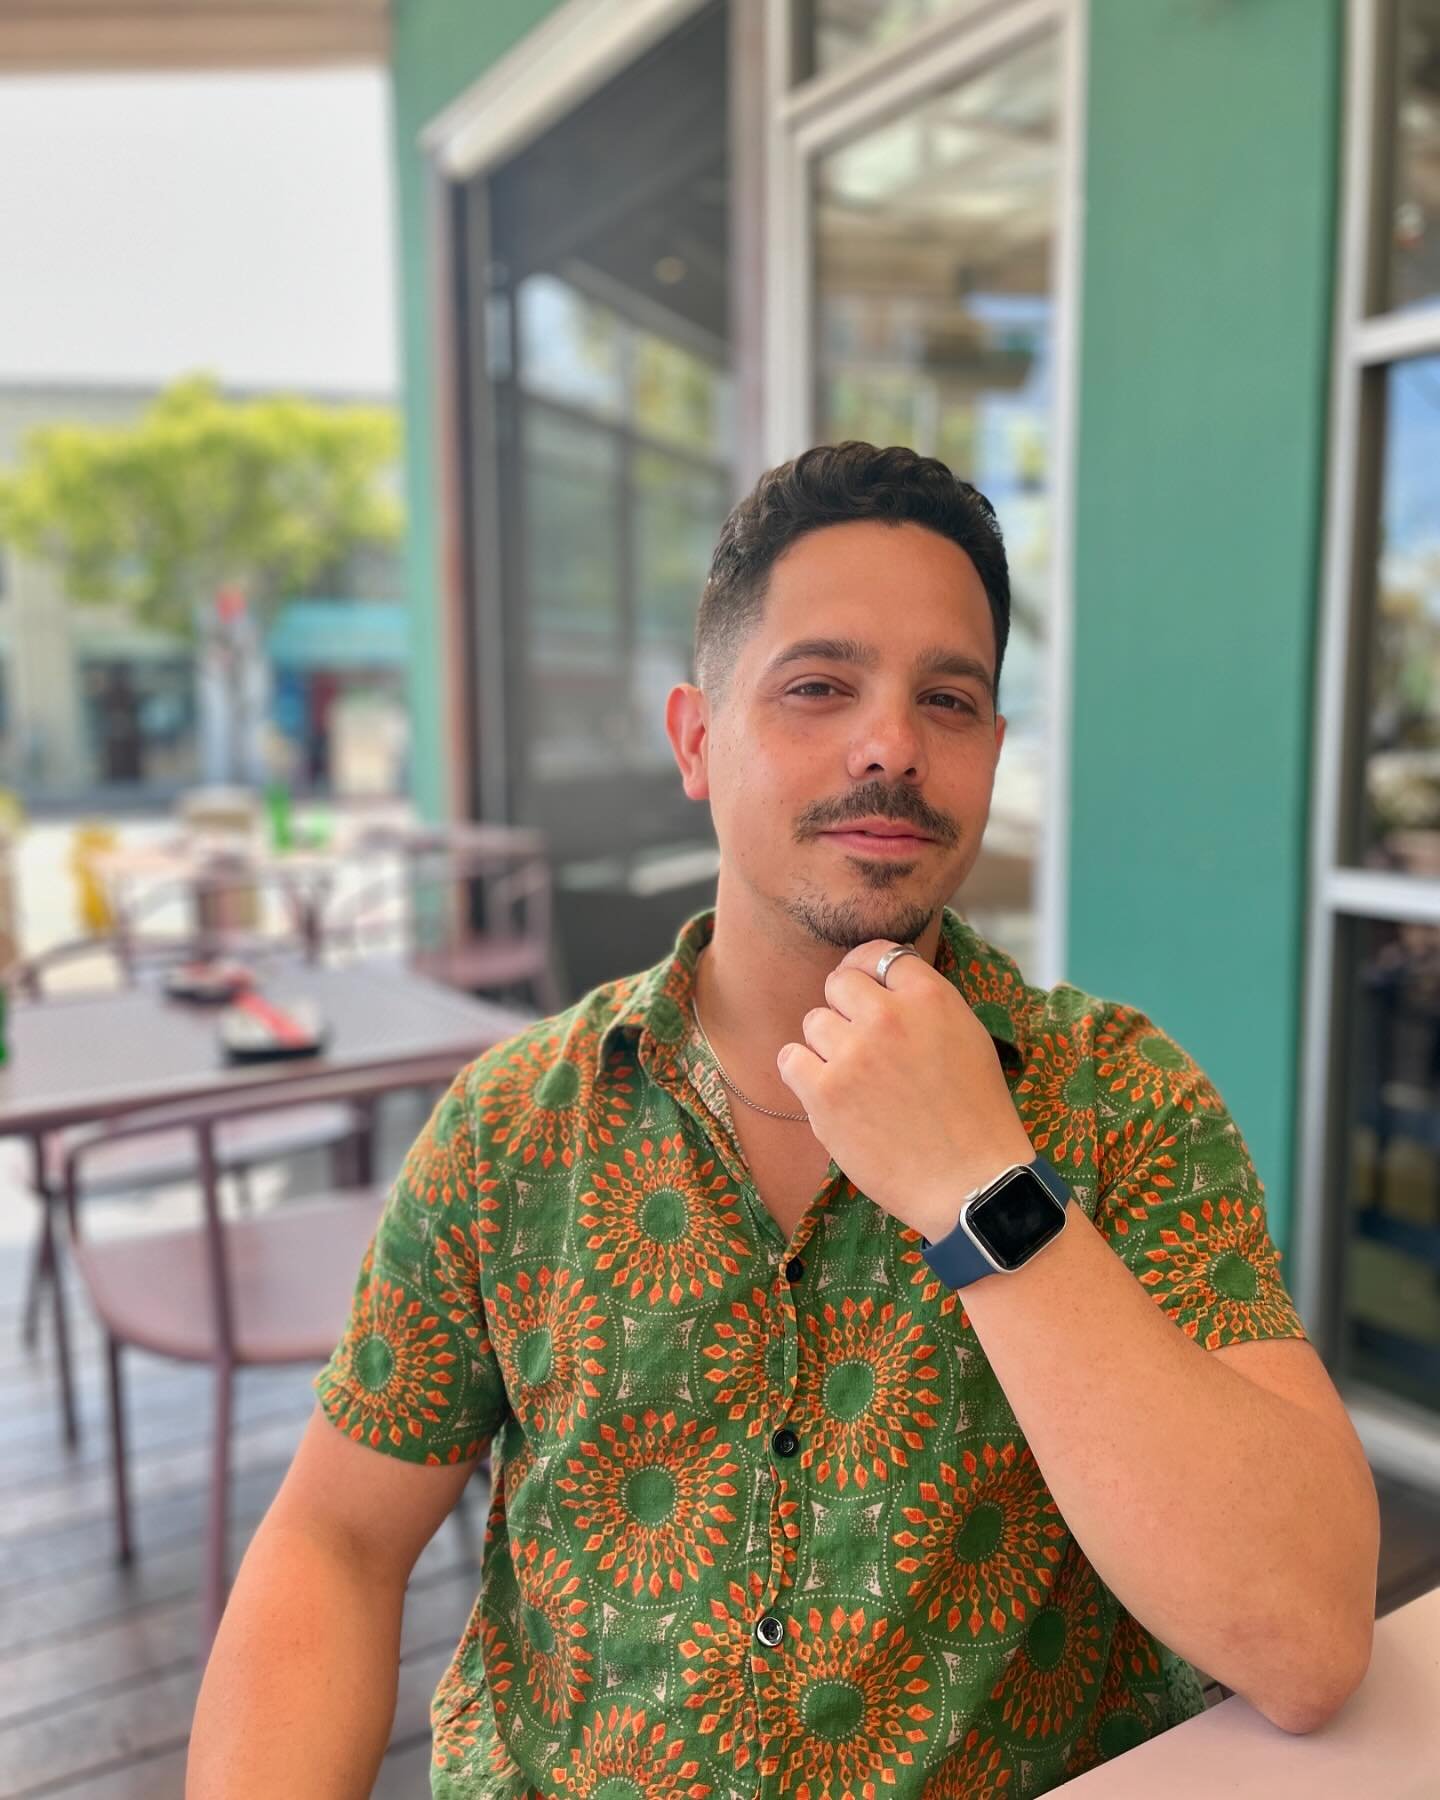 Help us choose a new headshot for our resident goofball +  general manager @dolfinodelares! 🕺🏻

1️⃣ 😏
2️⃣ 😆
3️⃣ 😶
4️⃣ 🤡

What do you think? Drop a comment with your vote! 🗳️ 

culver city | team building | los angeles | restaurant life